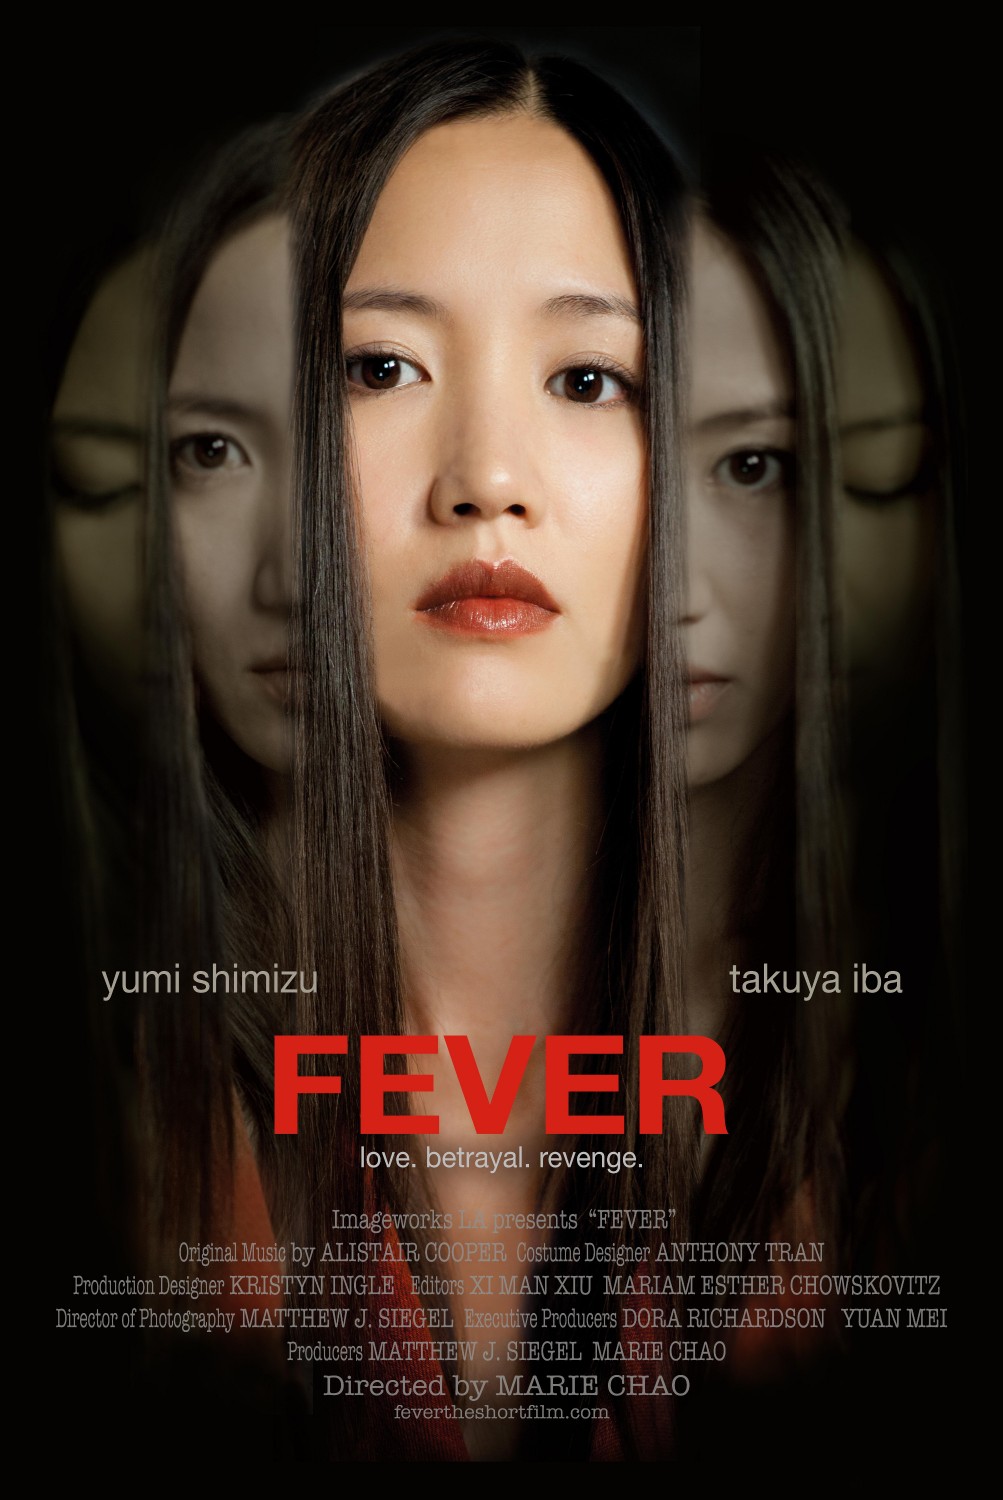 Extra Large Movie Poster Image for Fever